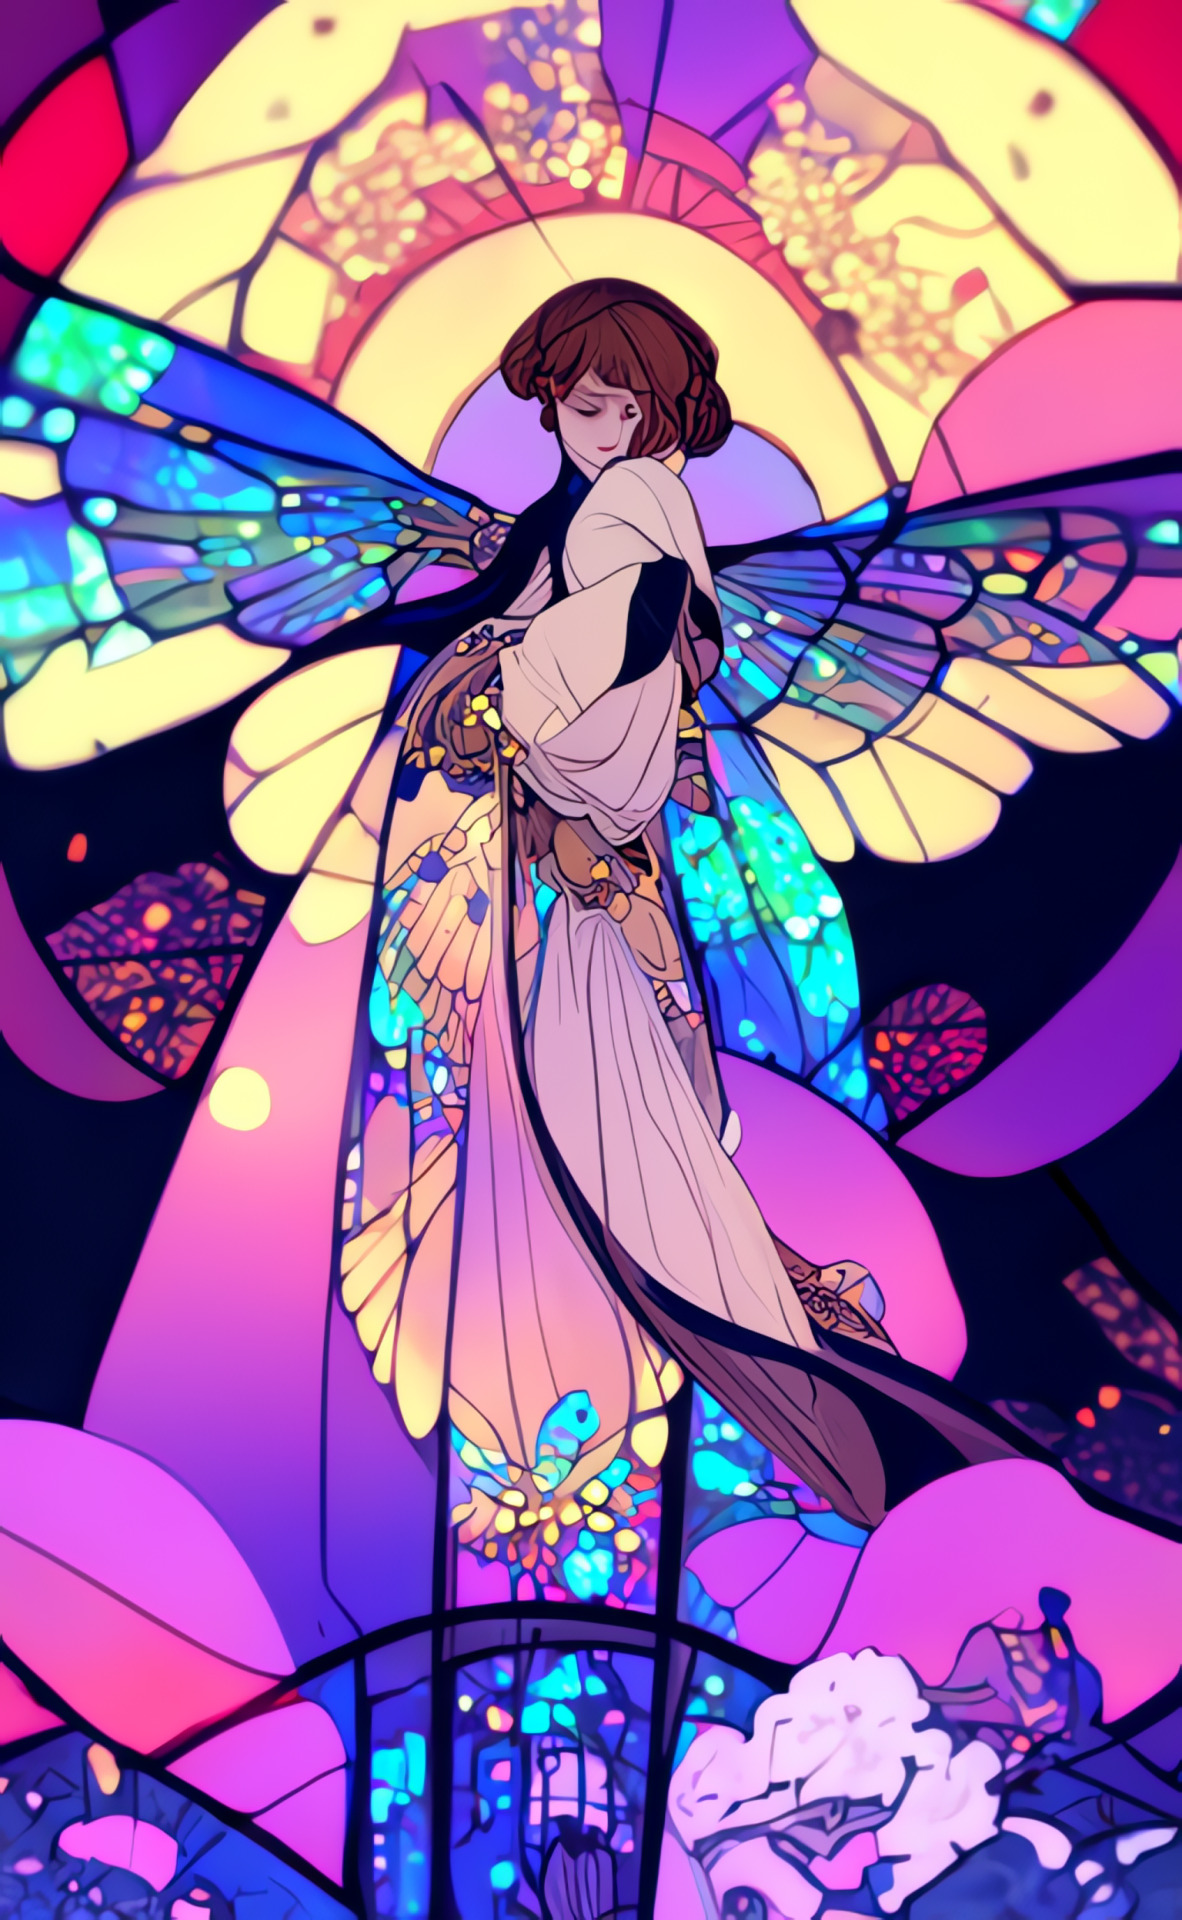 An image in a cel shaded anime and stained glass art nouveau style of what appears to be a brown haired white woman with insect wings spreading out behind her, dressed in white cloth and holding something wrapped in cloth.